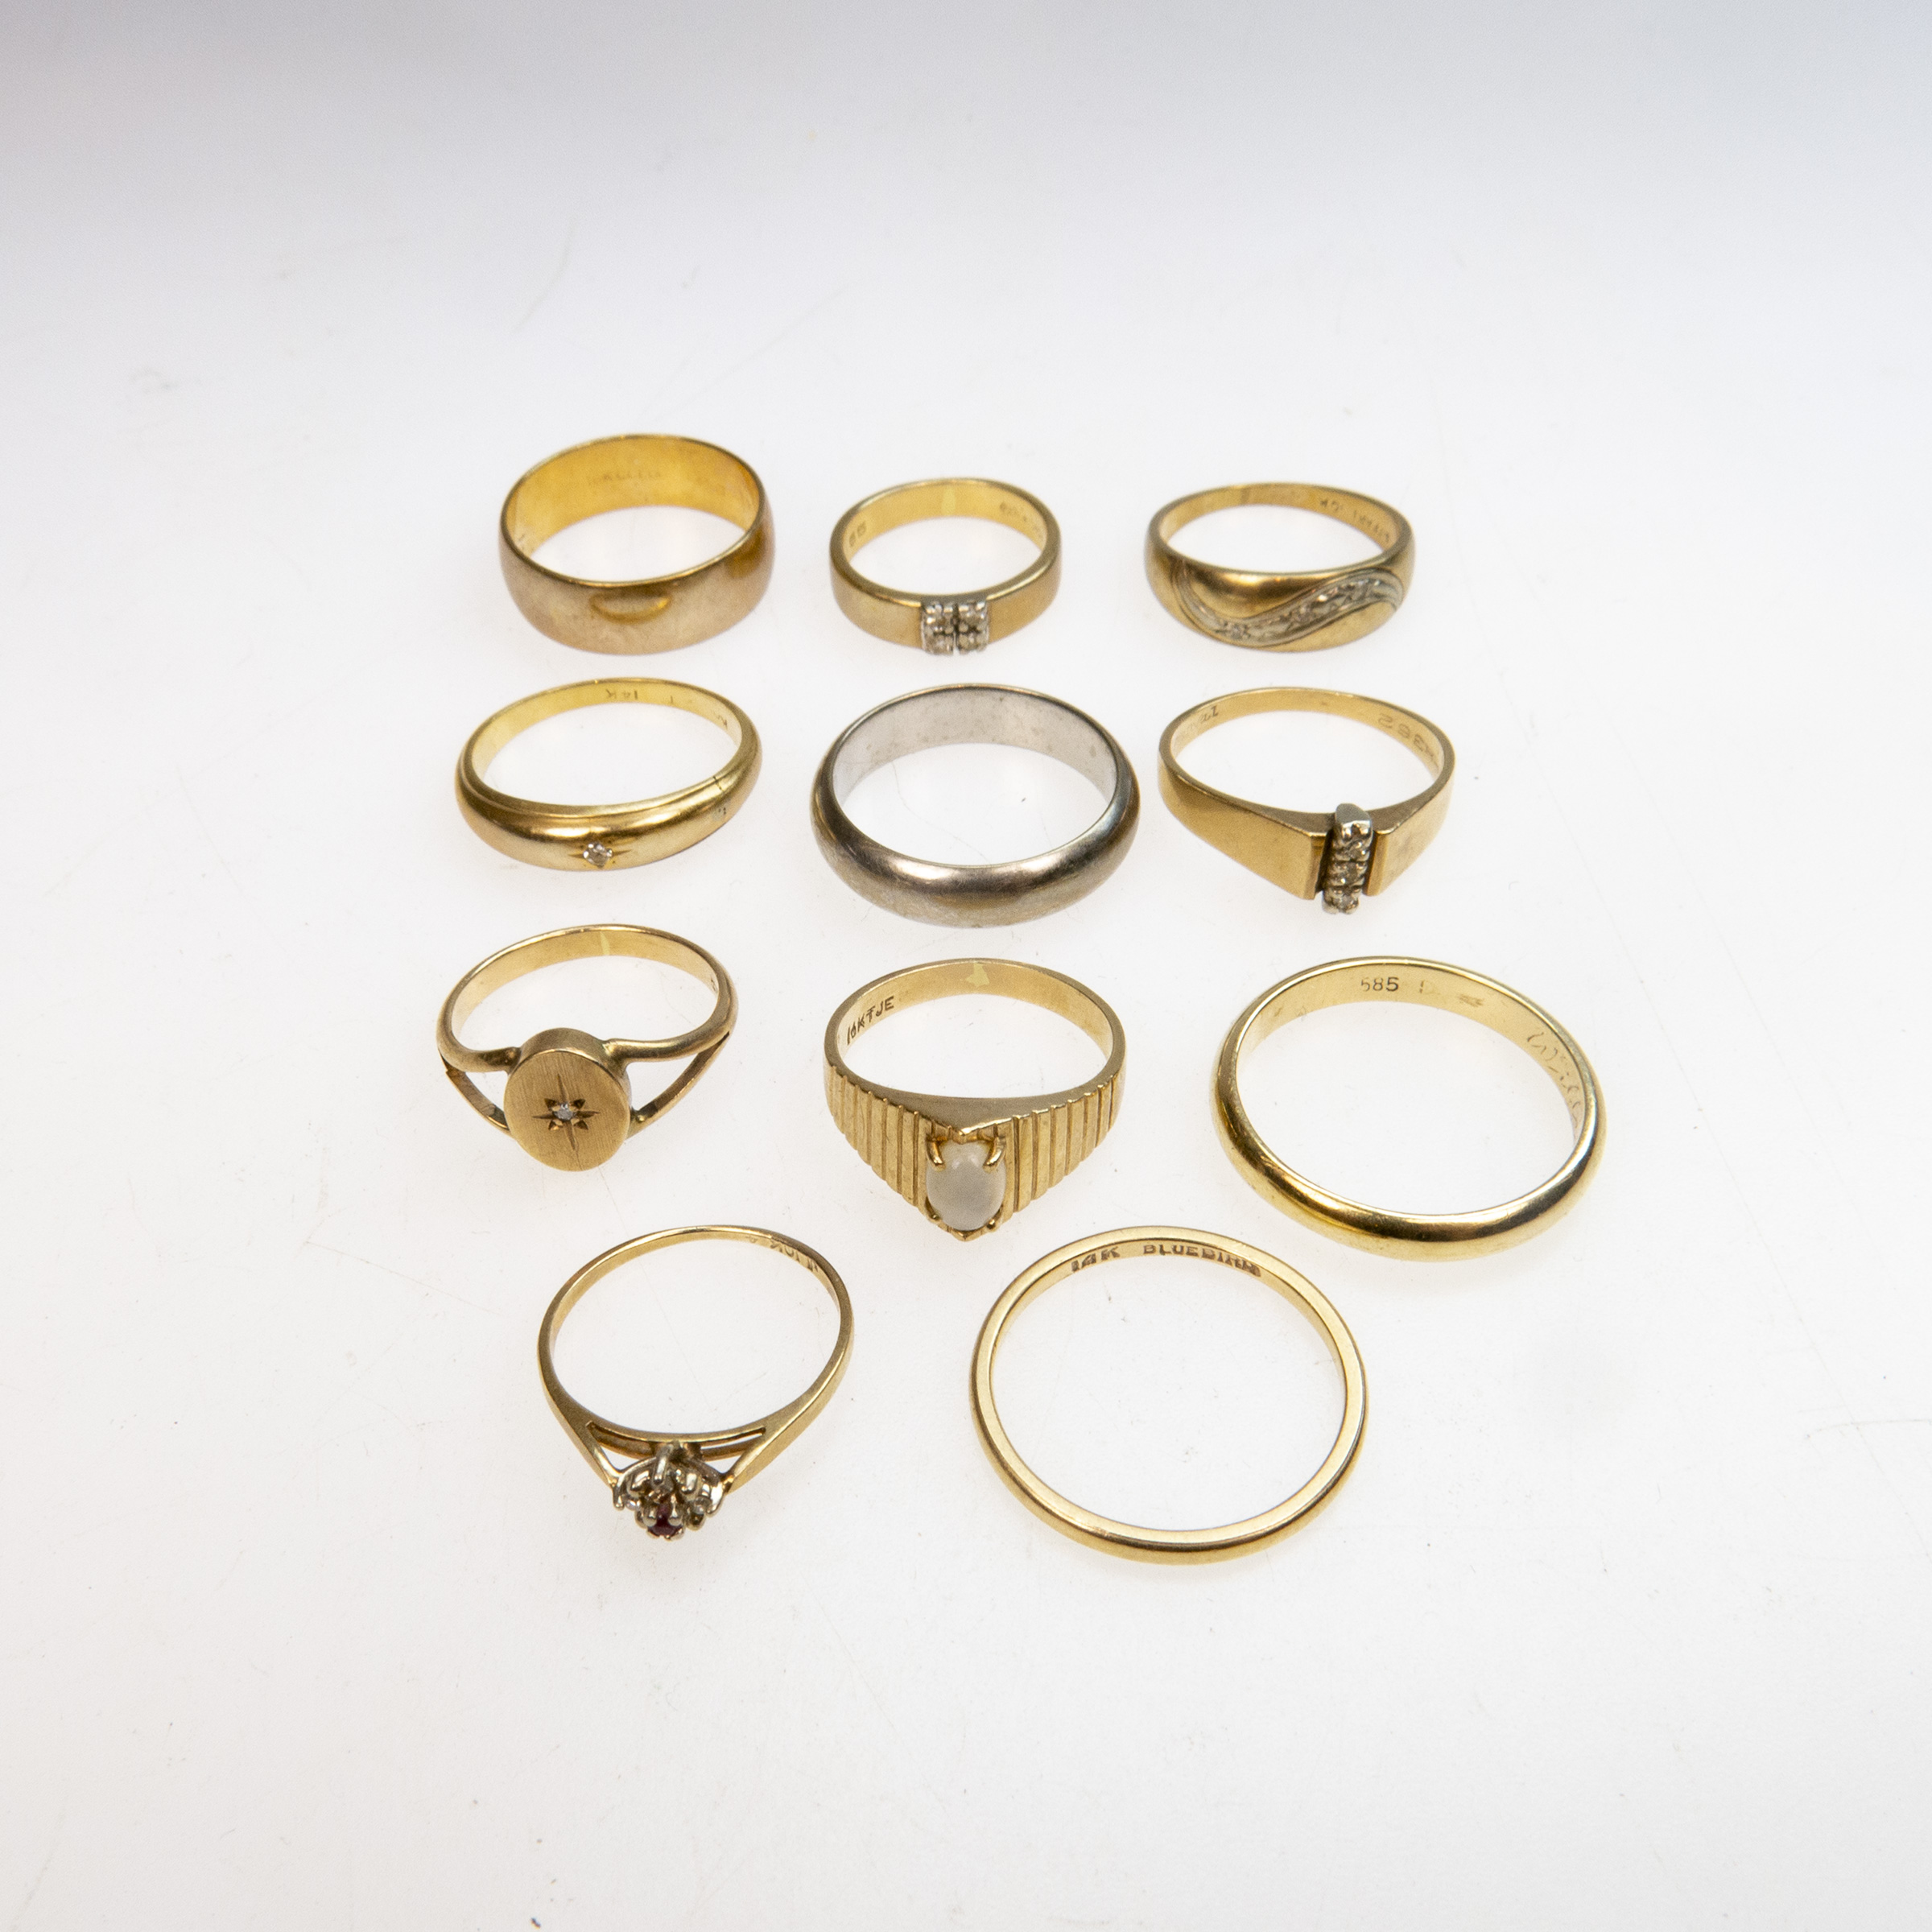 3 x 14k & 8 x 10k Gold Rings and Bands